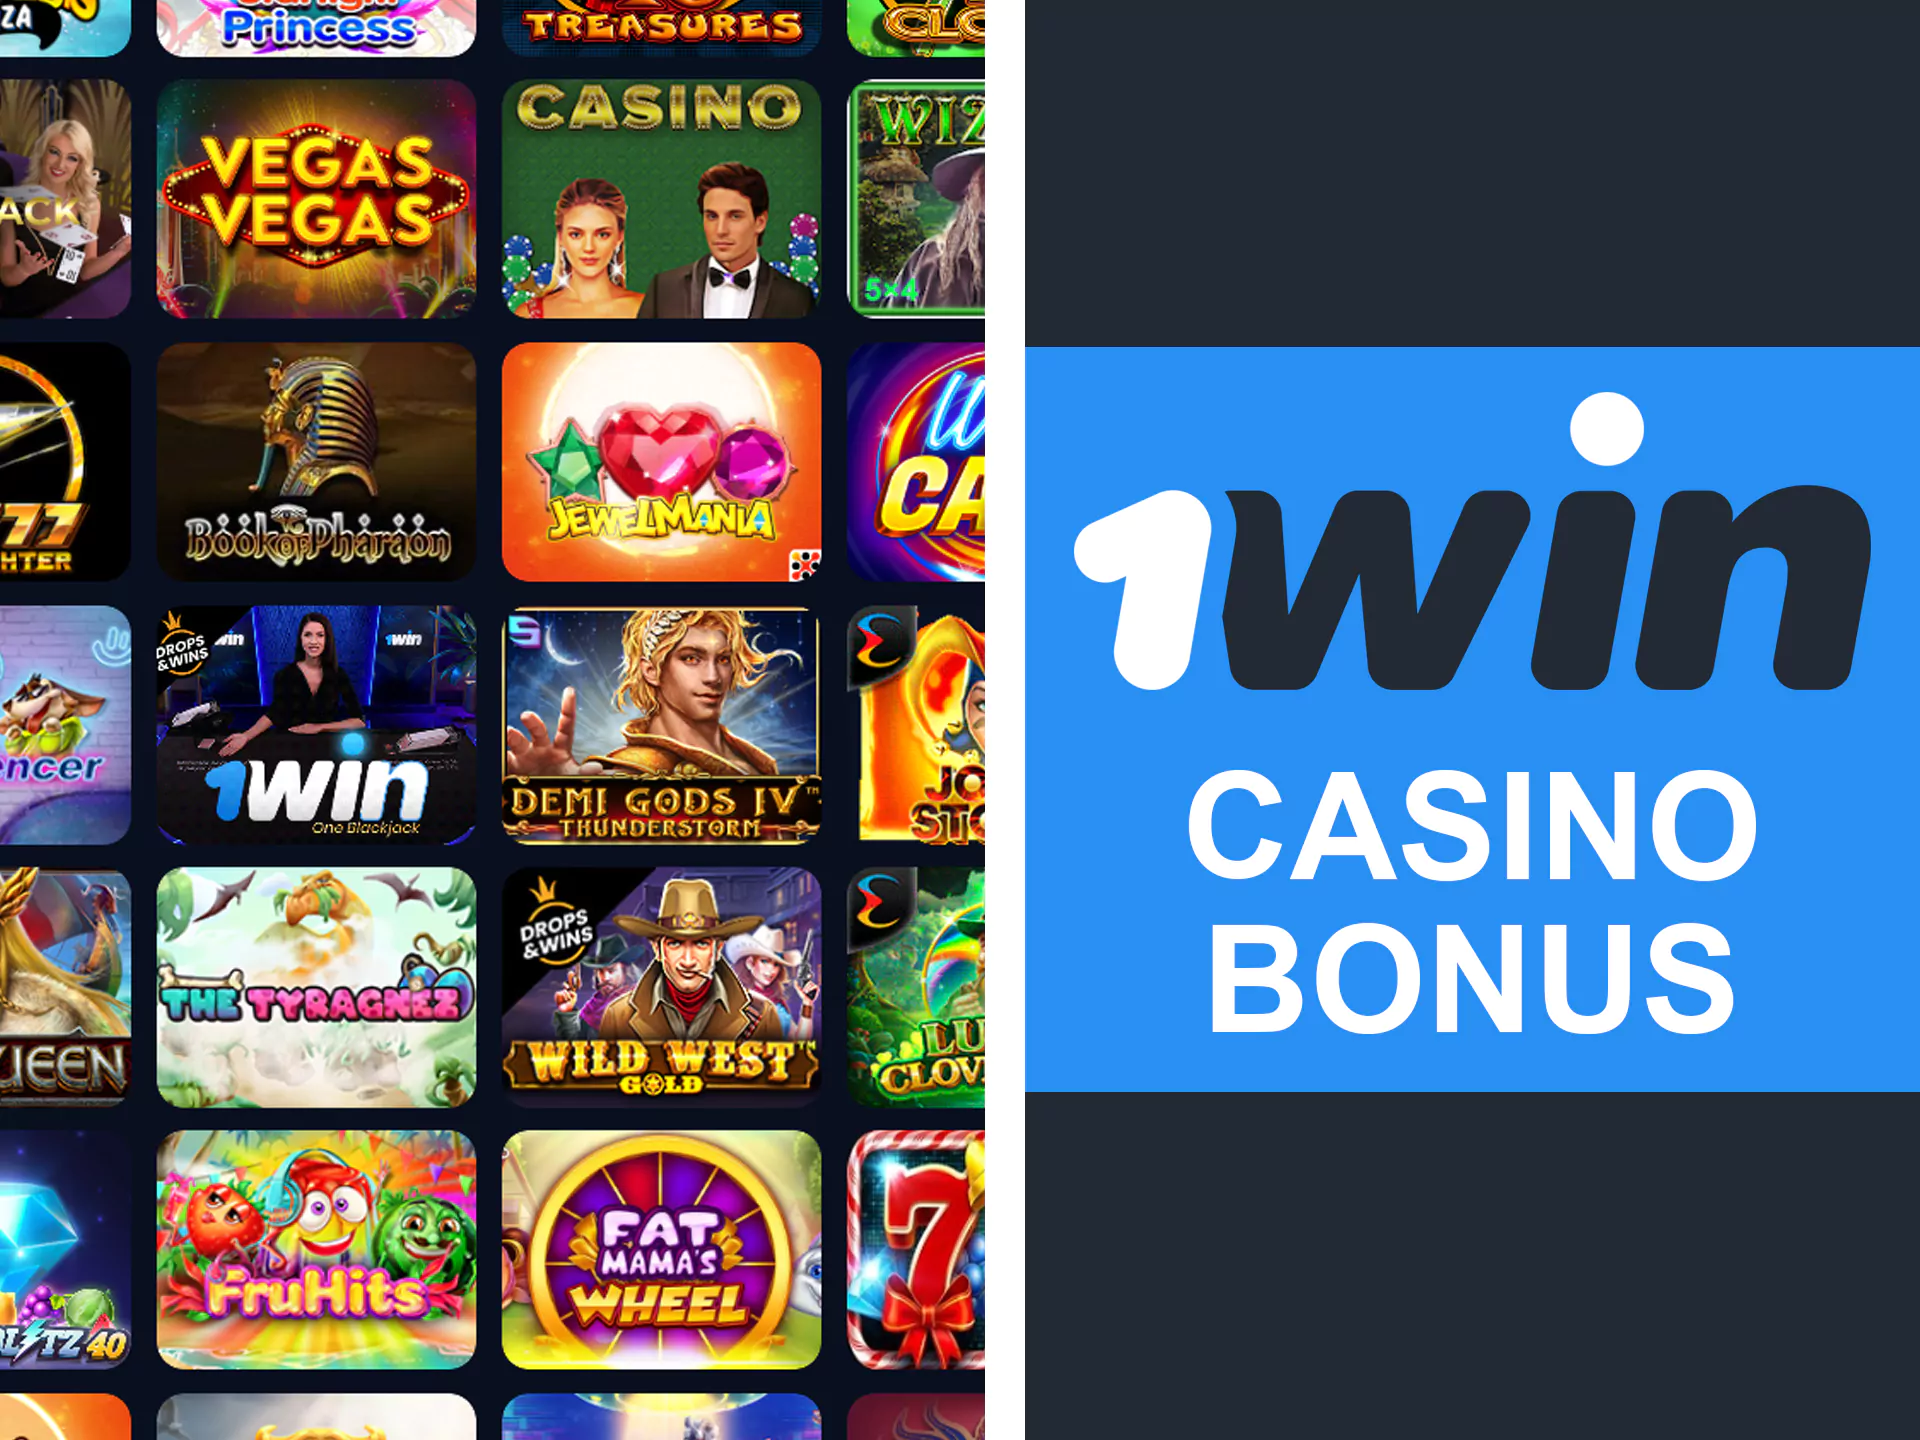 Play casino games with 1win app and get more bonuses.